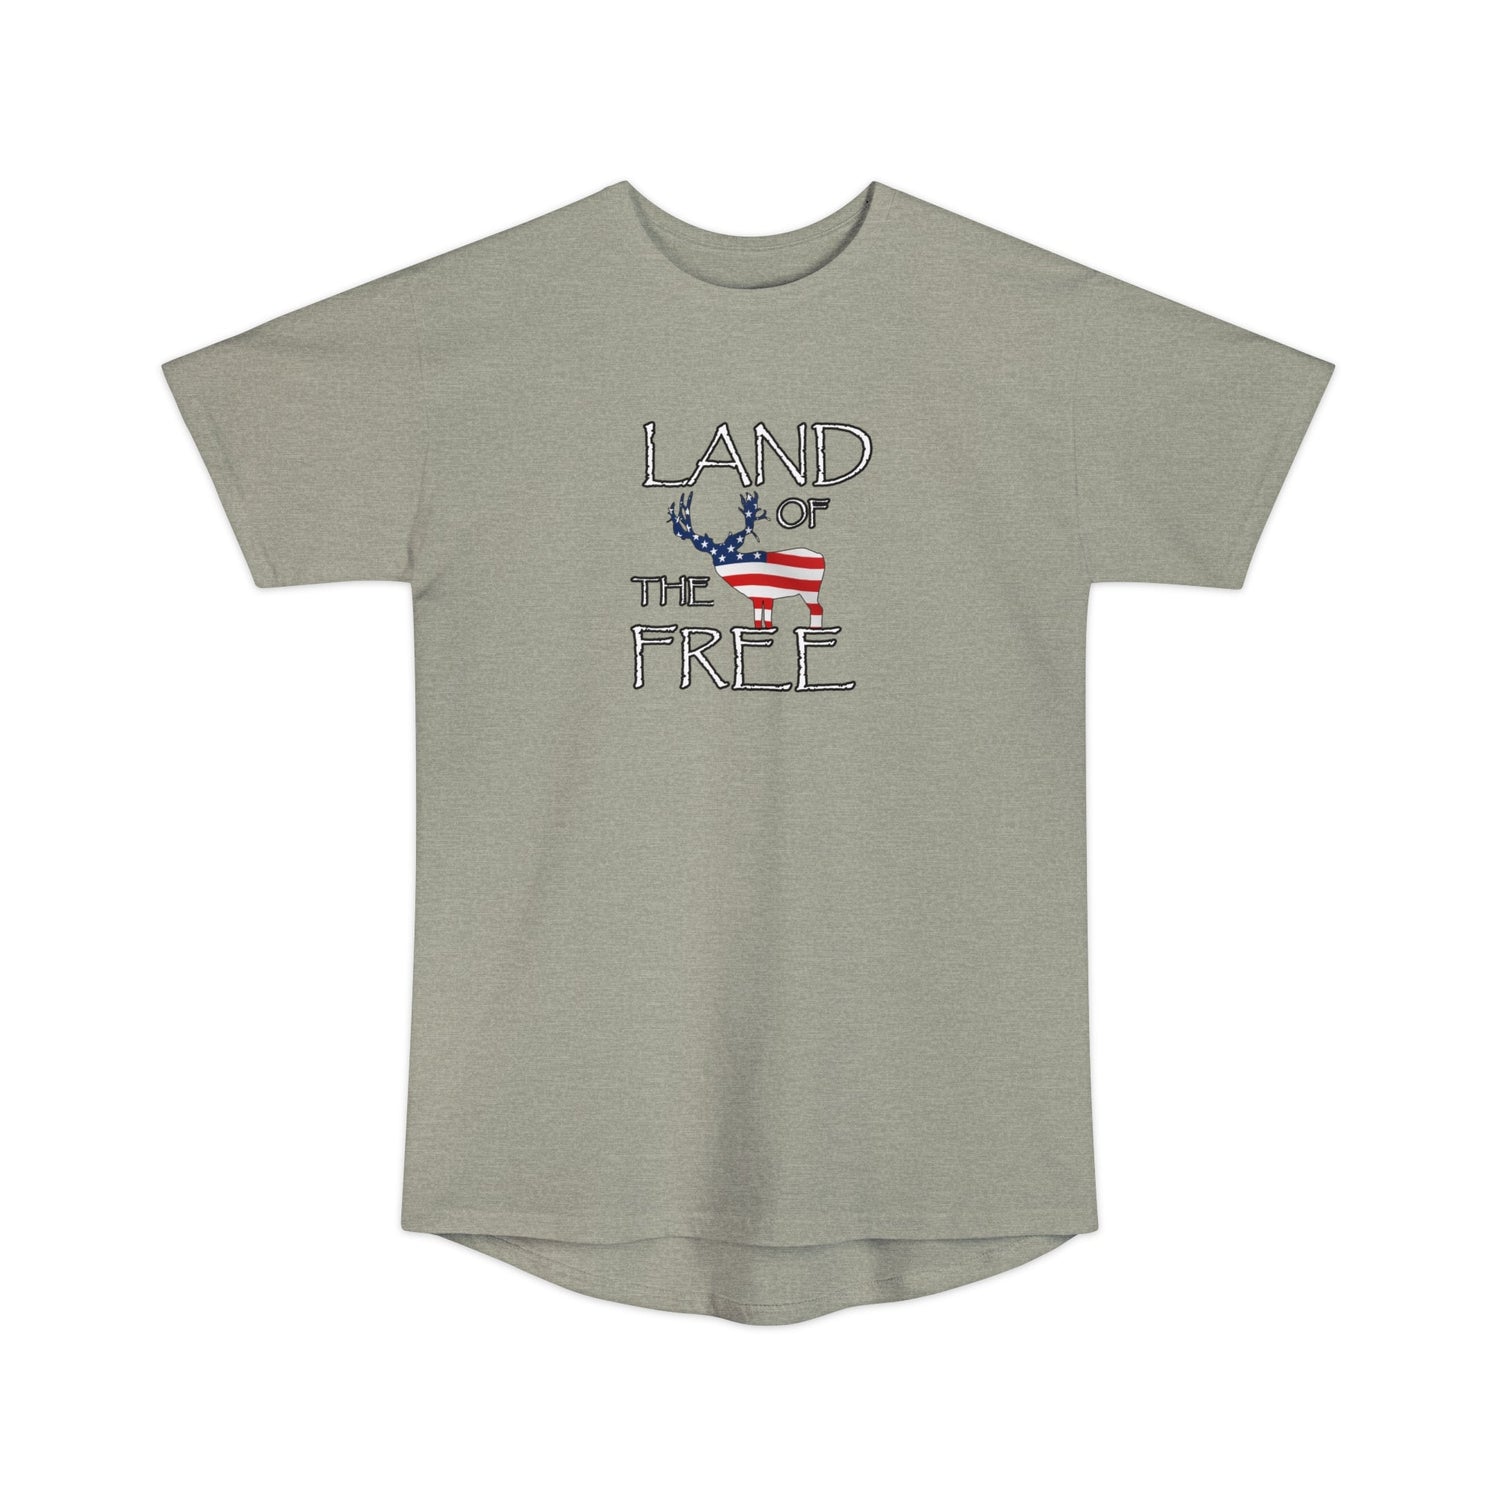 Athletic tall patriotic deer hunting t-shirt, color light grey, front design placement